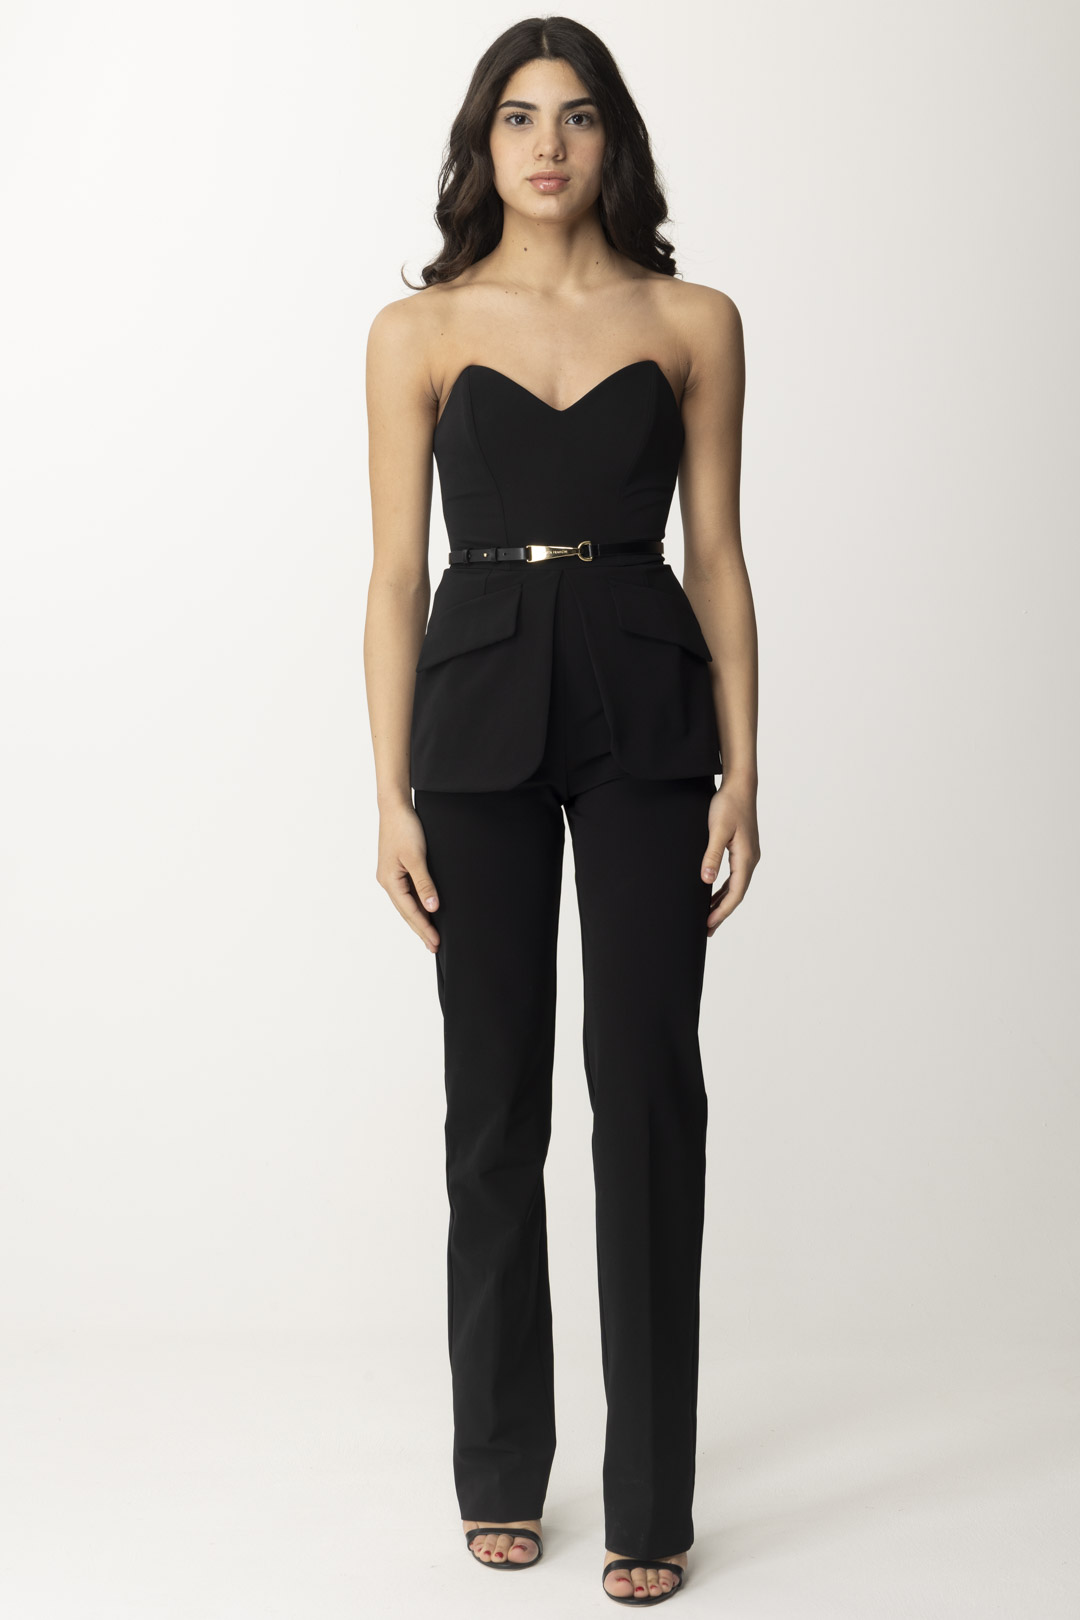 Preview: Elisabetta Franchi Long Jumpsuit with Bodice and Peplum Nero